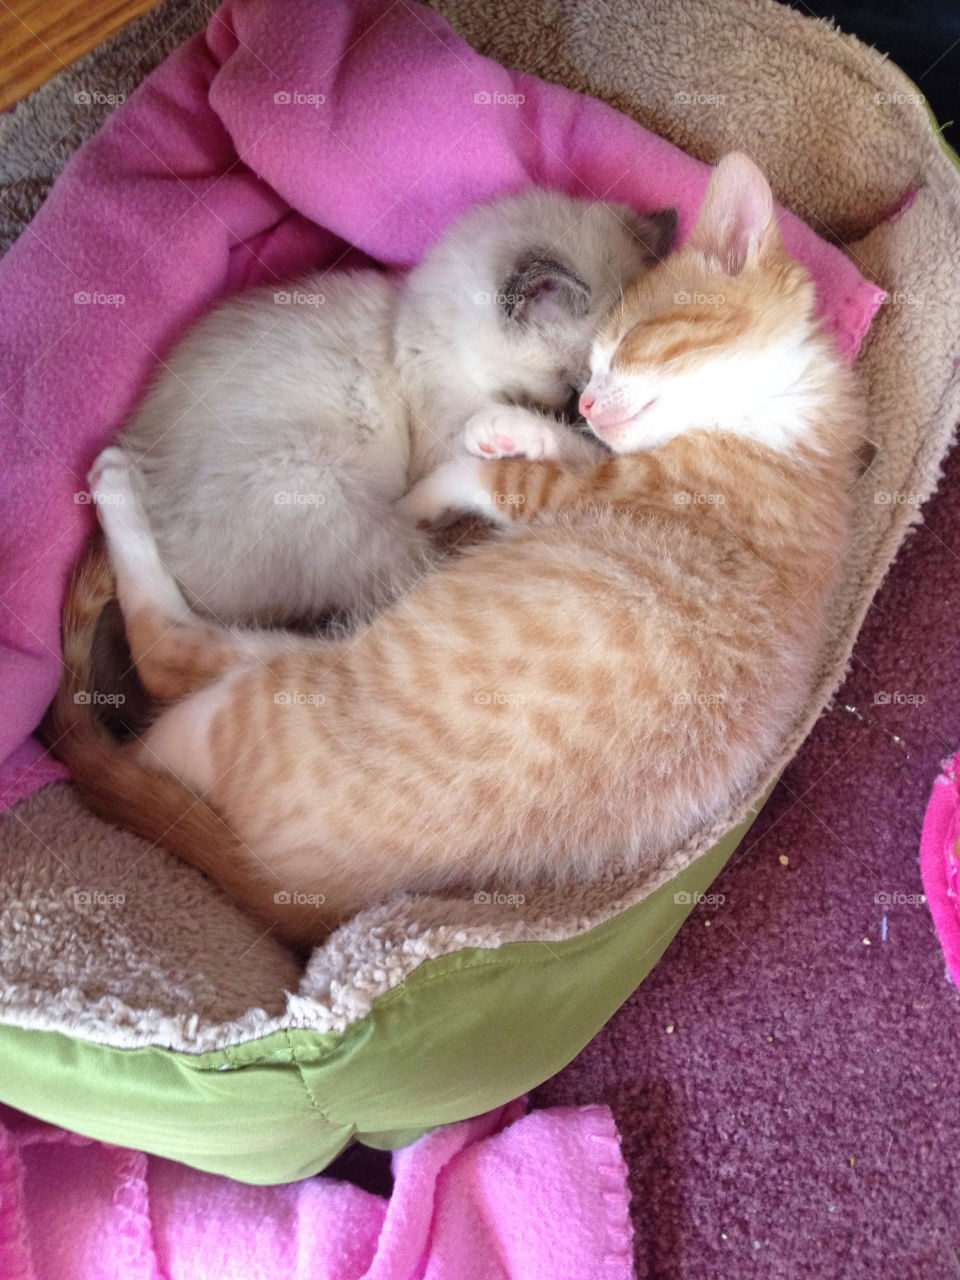 cozy slumber sleeping kittens by sarahrutherford